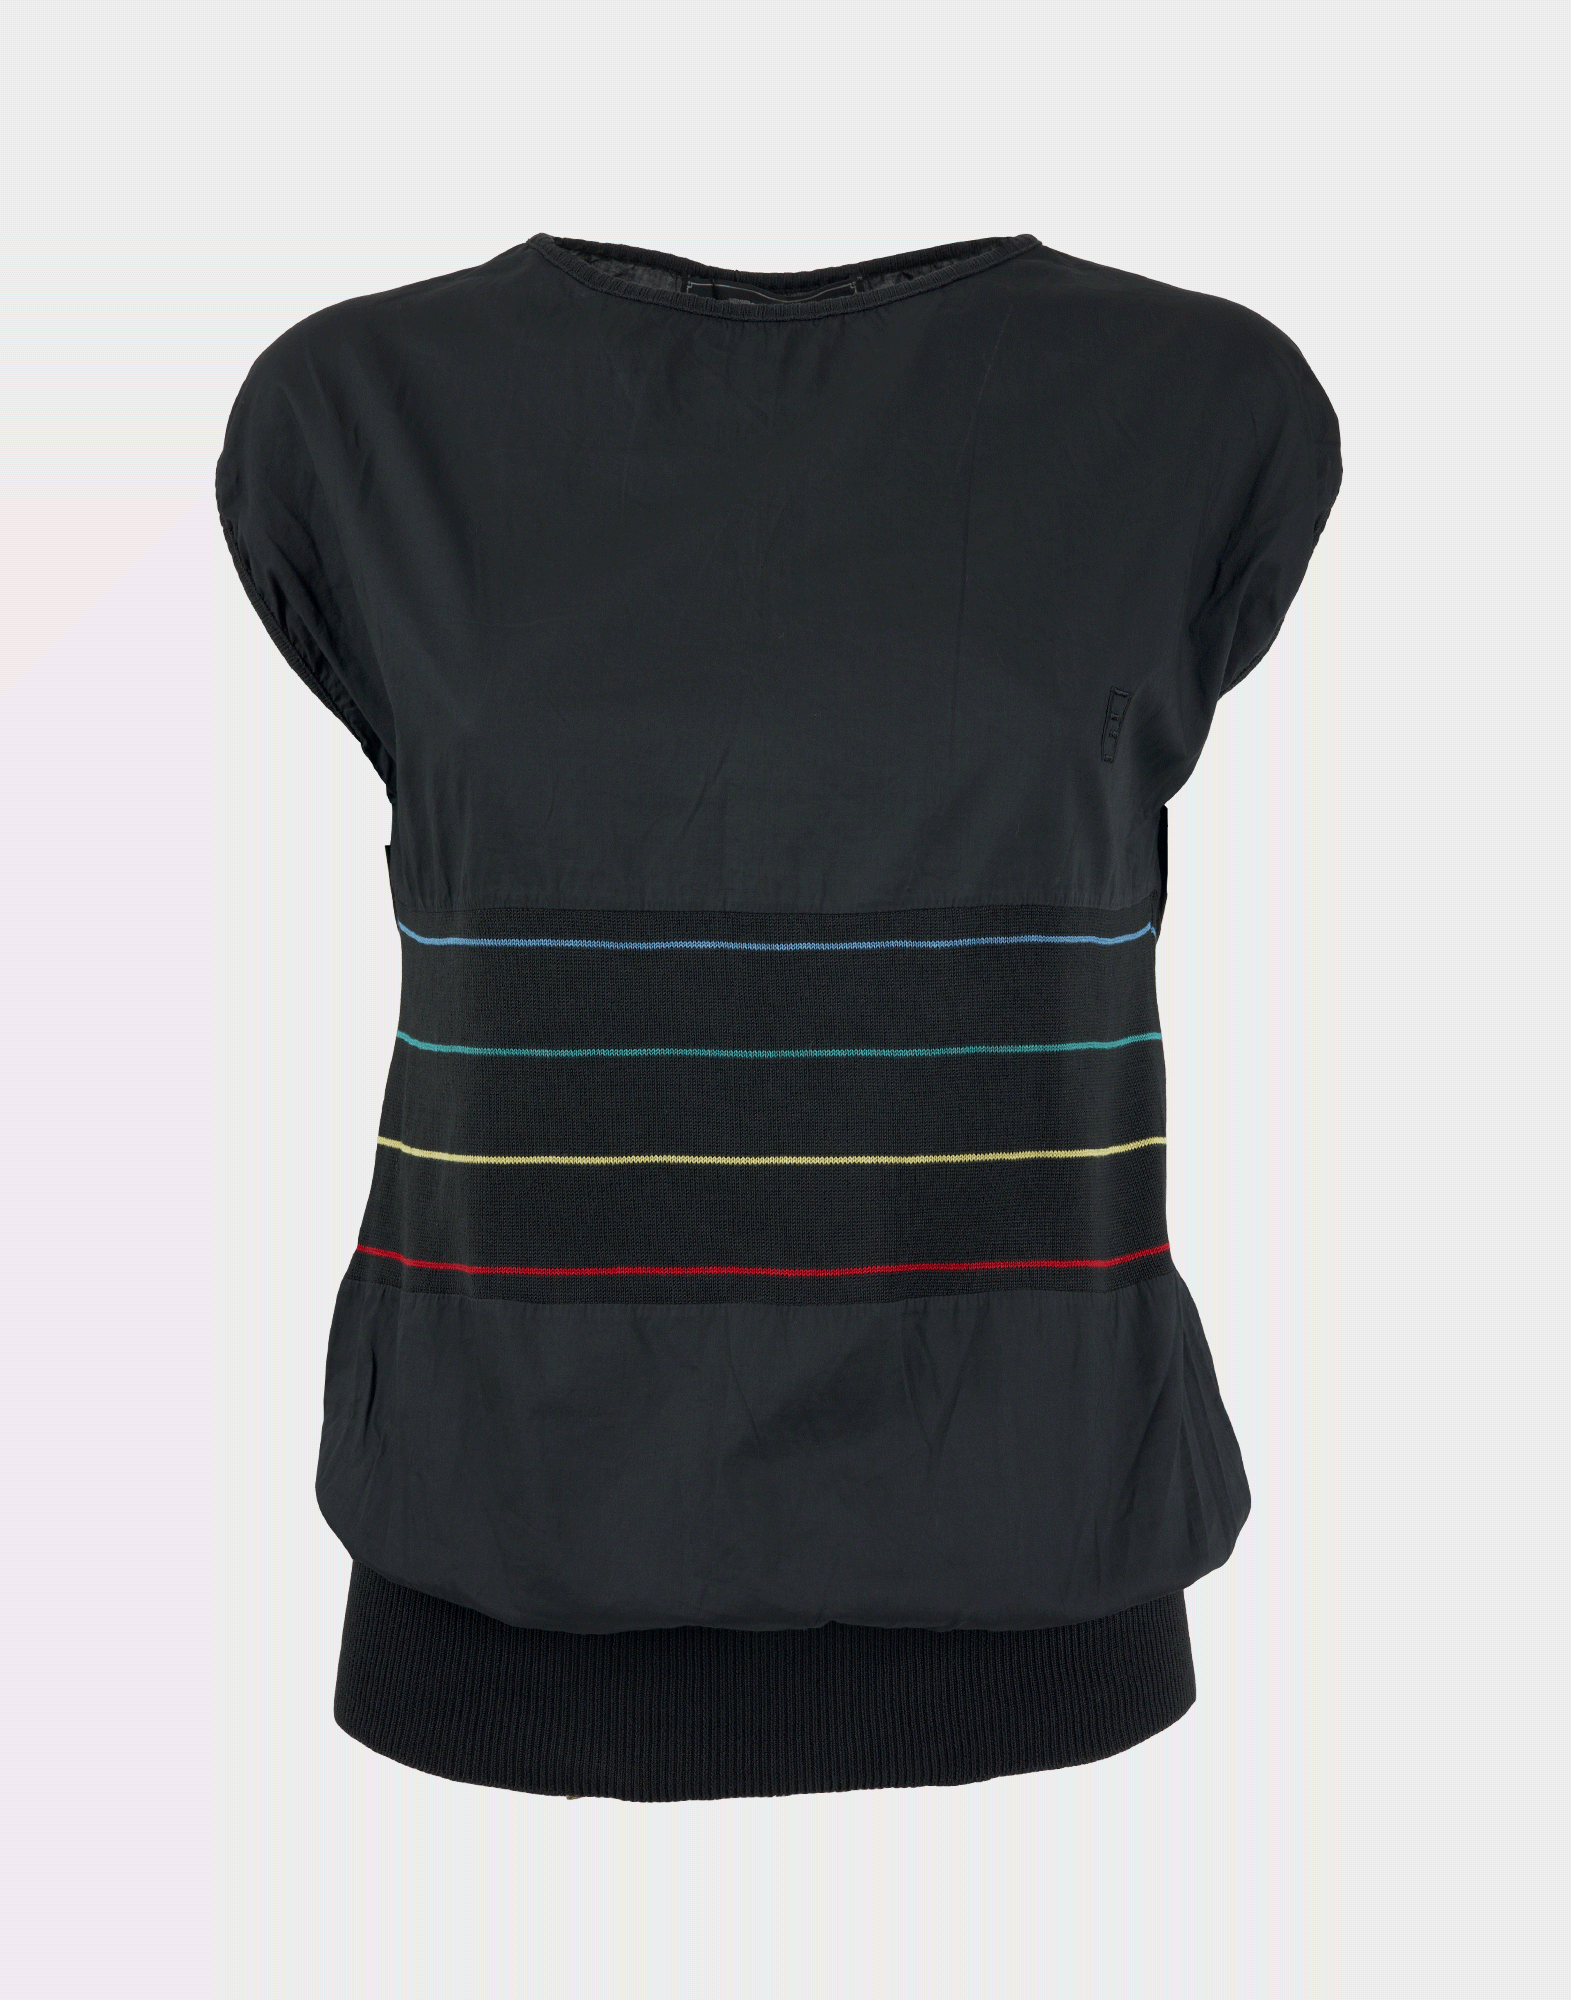 Women's blue sleeveless T-shirt with colorful details and an elastic waistband